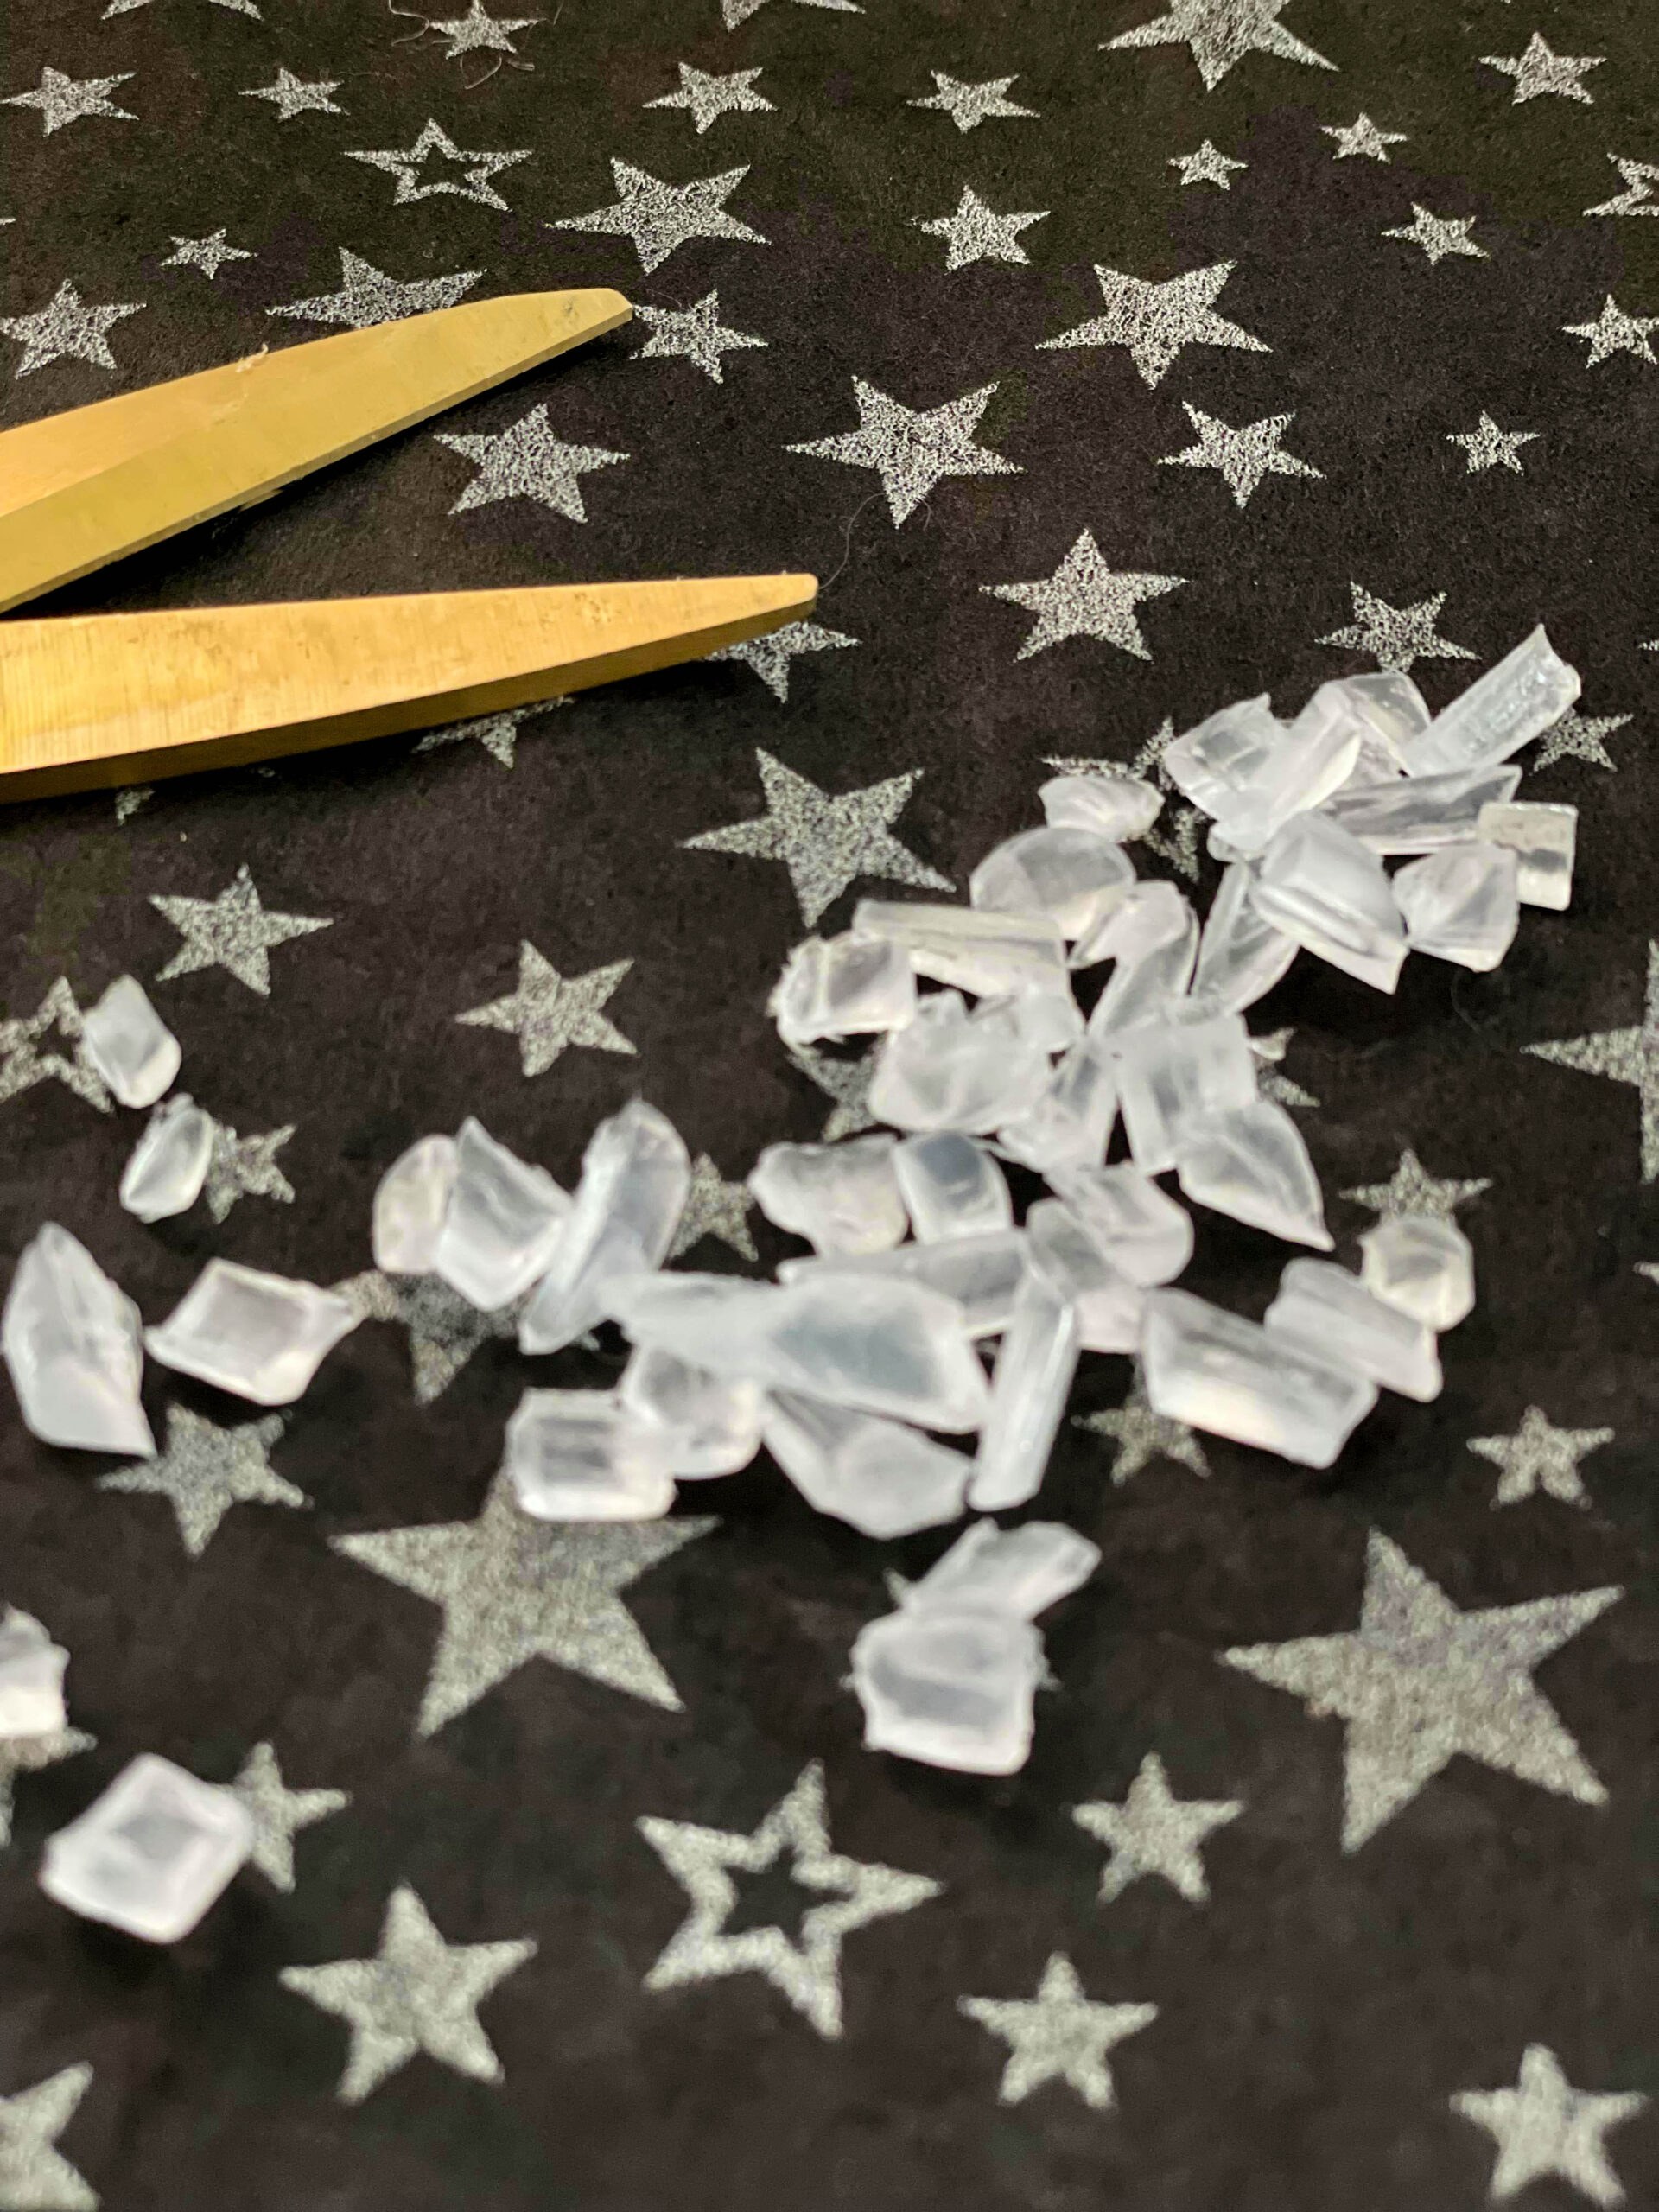 cut glue sticks to create diy faux crystals with color shift paint